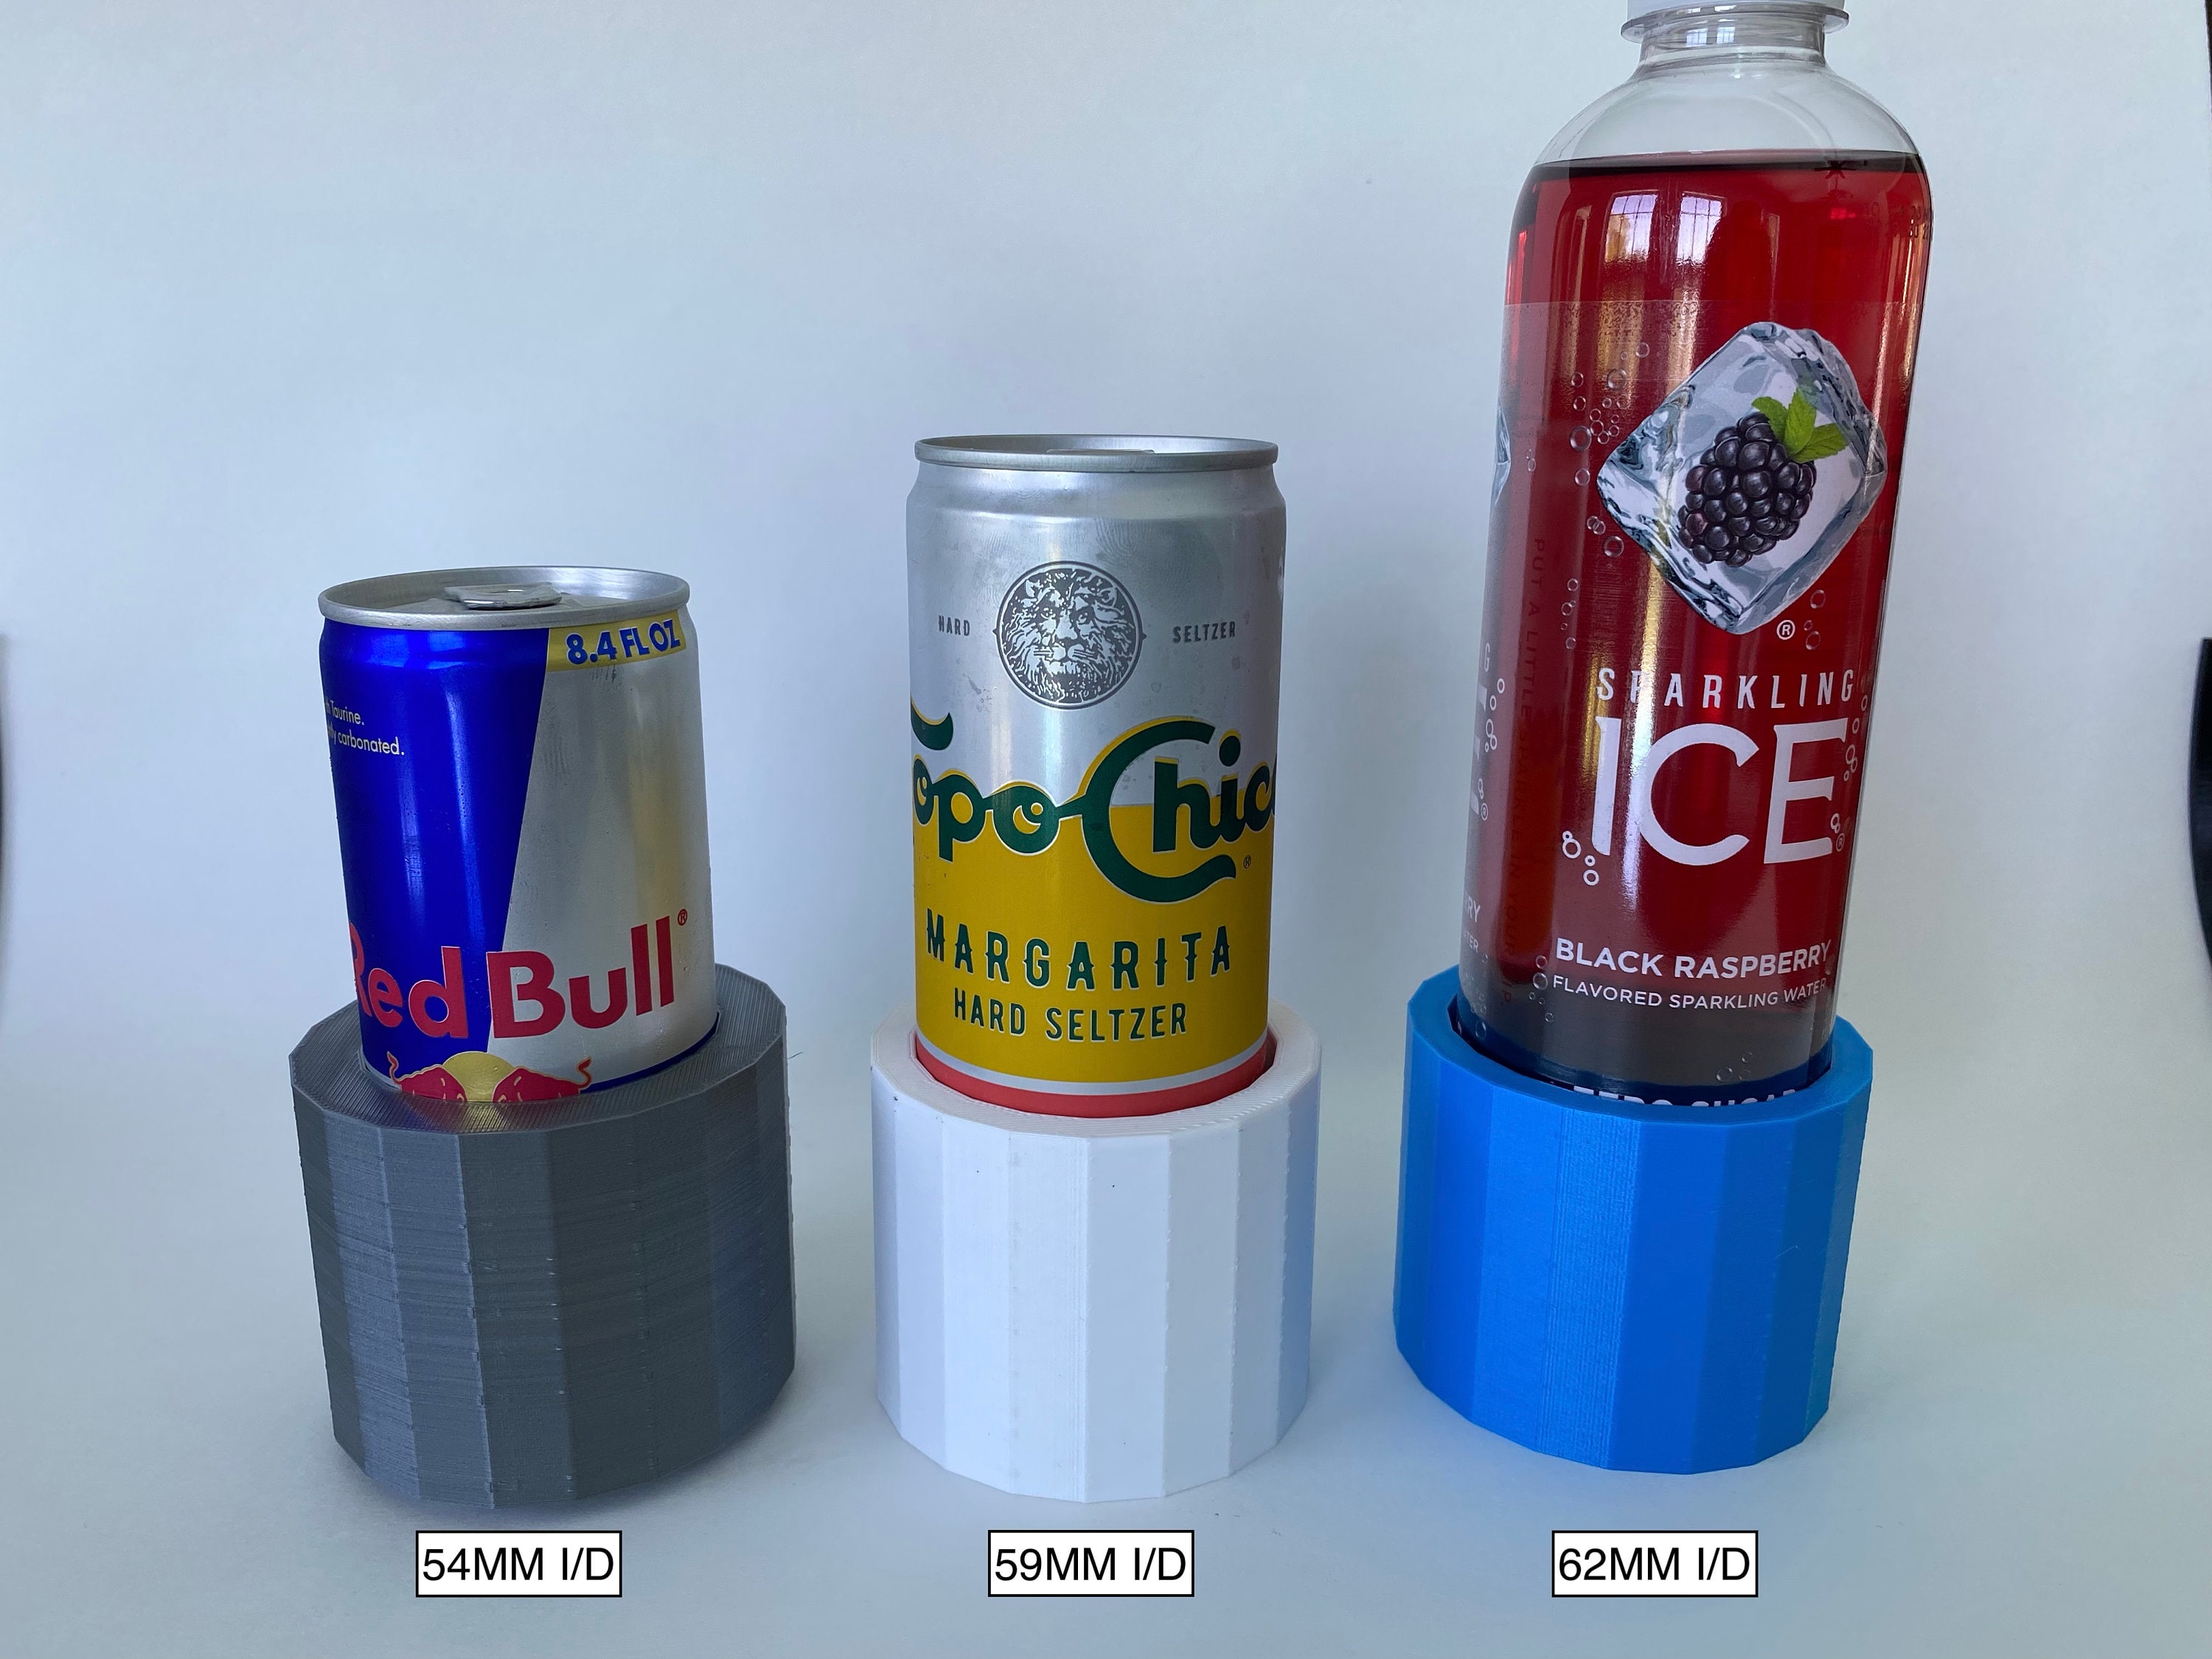 Yeti Colster Rambler 16oz can use Arctic Brumate Adaptor for 12oz can. (Can  be frozen too for cooler drink). : r/YetiCoolers